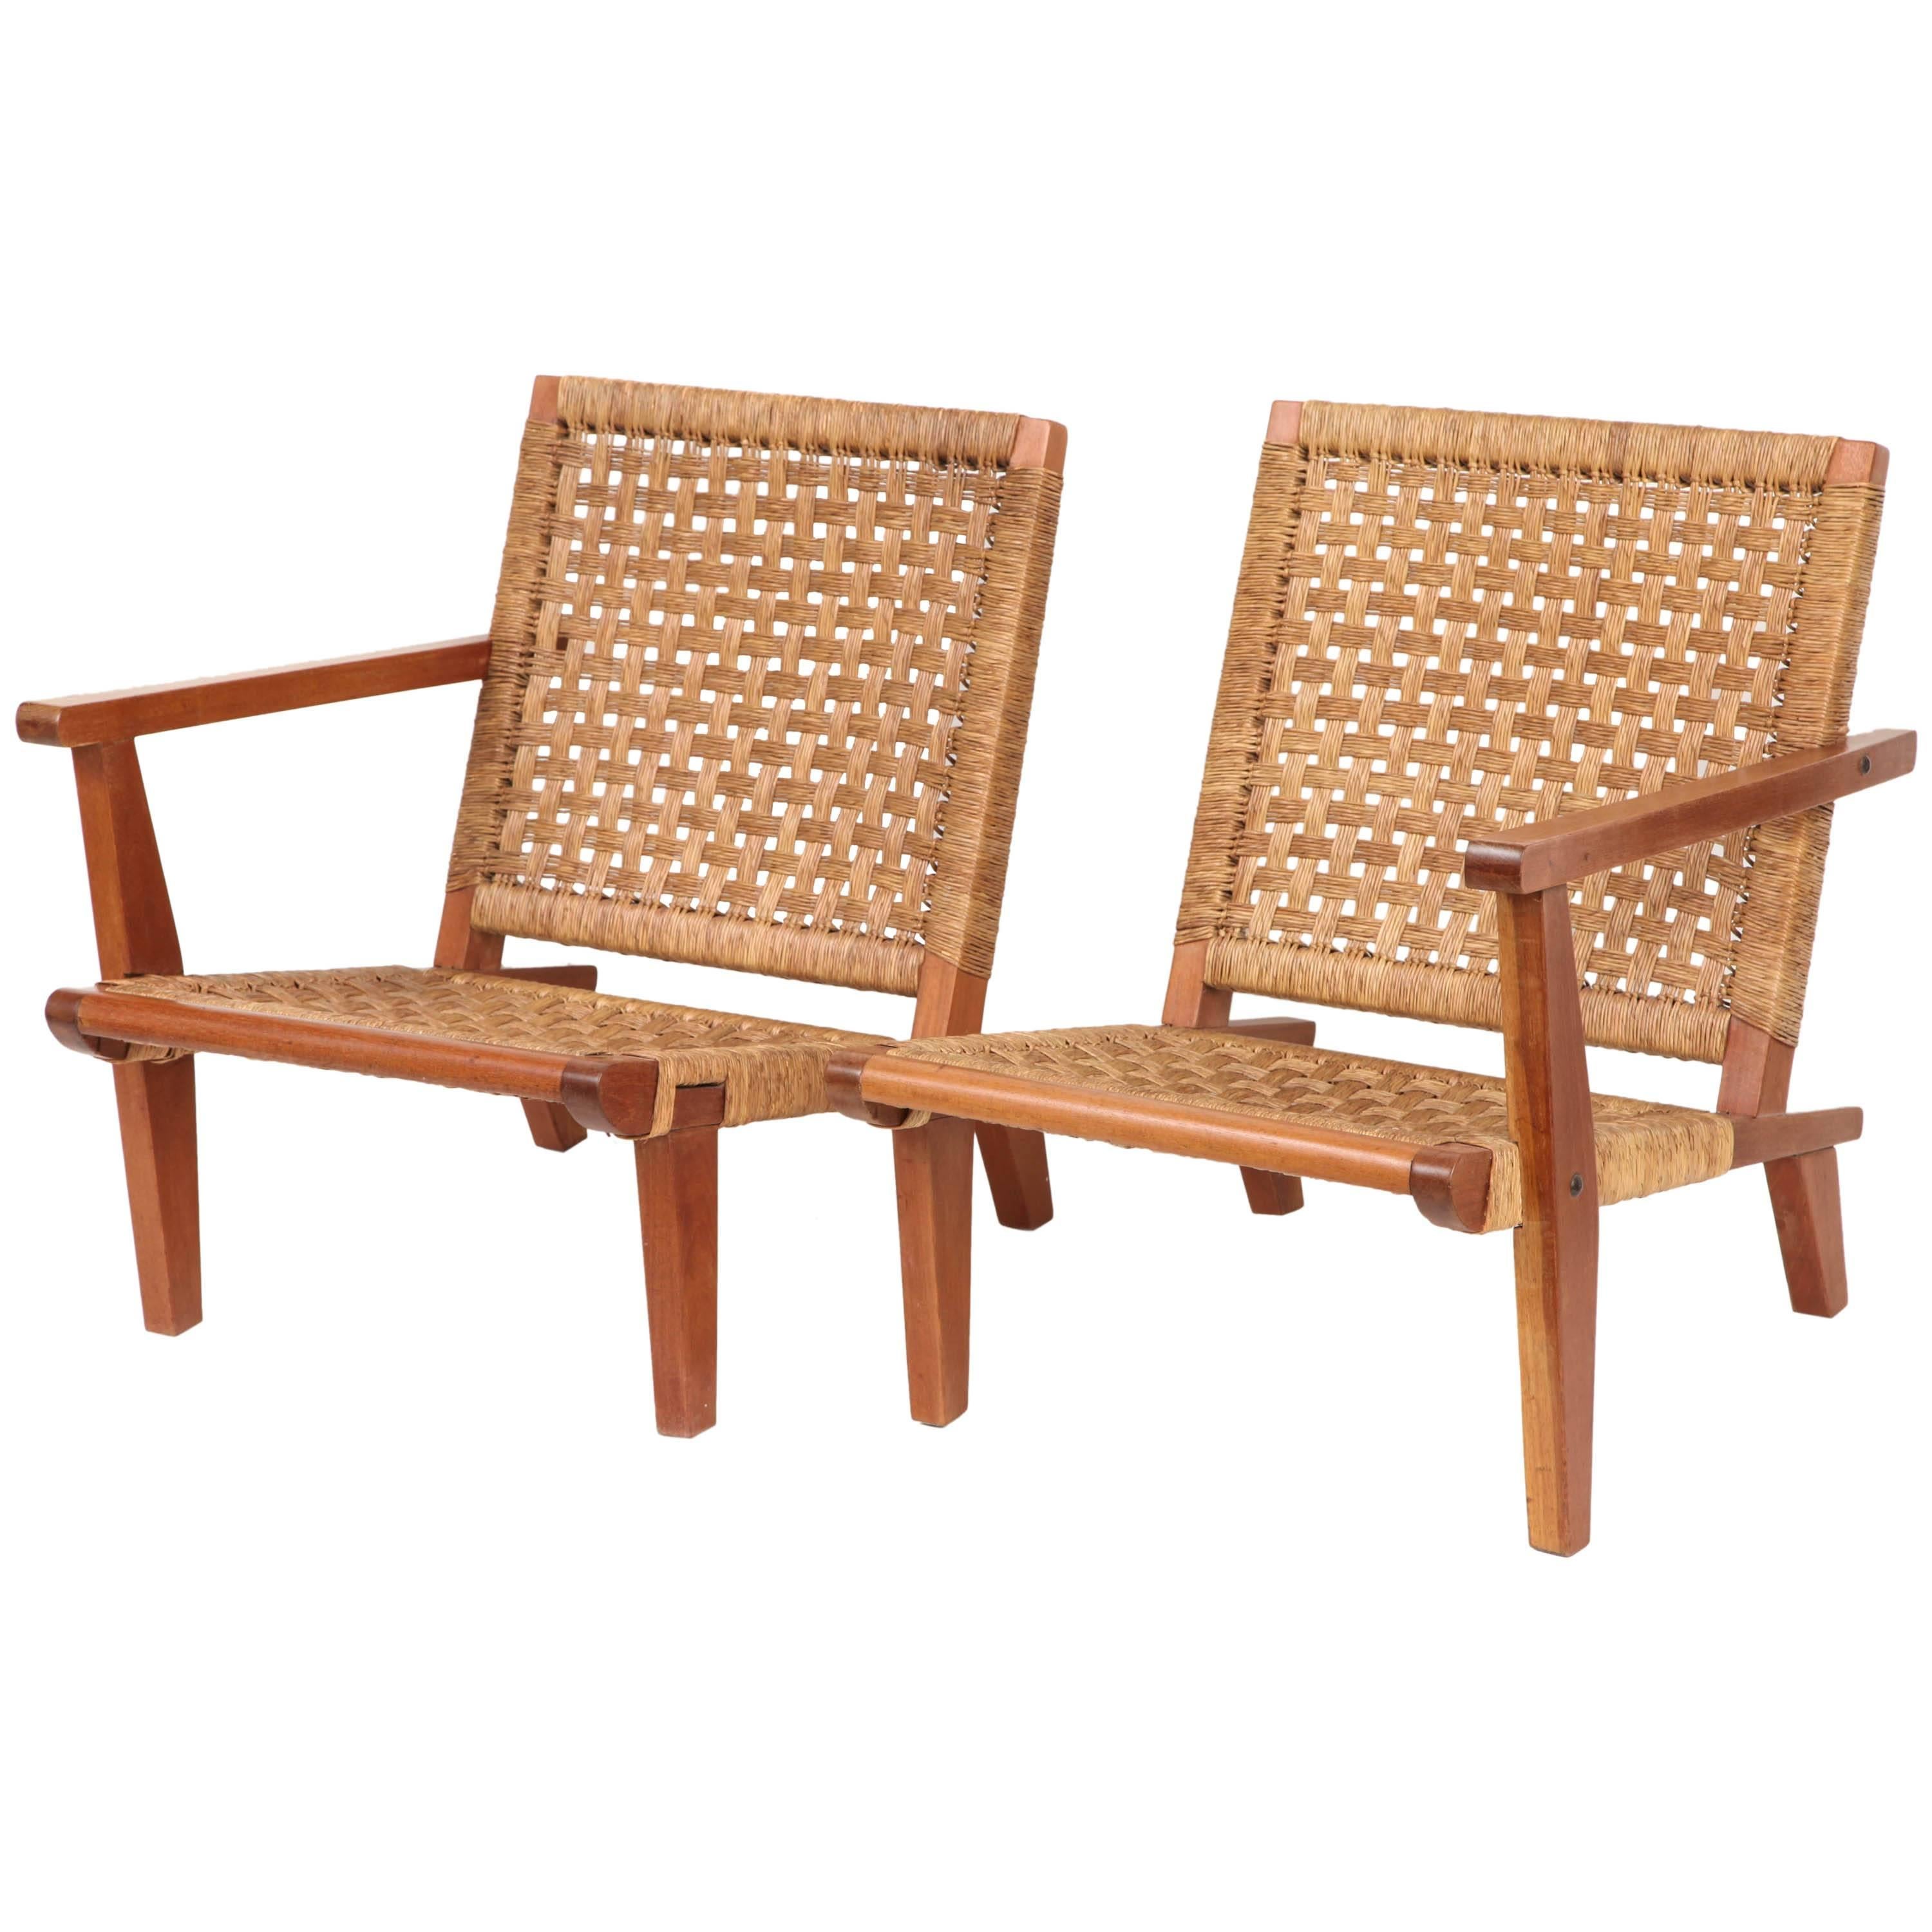 Divided settee by Mexican designer Clara Porset. Bold modernist walnut frames with handwoven rush seats and backs. Mirror image one-arm chairs can be used separately or places side-by-side as a settee. Mexico, 1950s, with original rushing and oiled